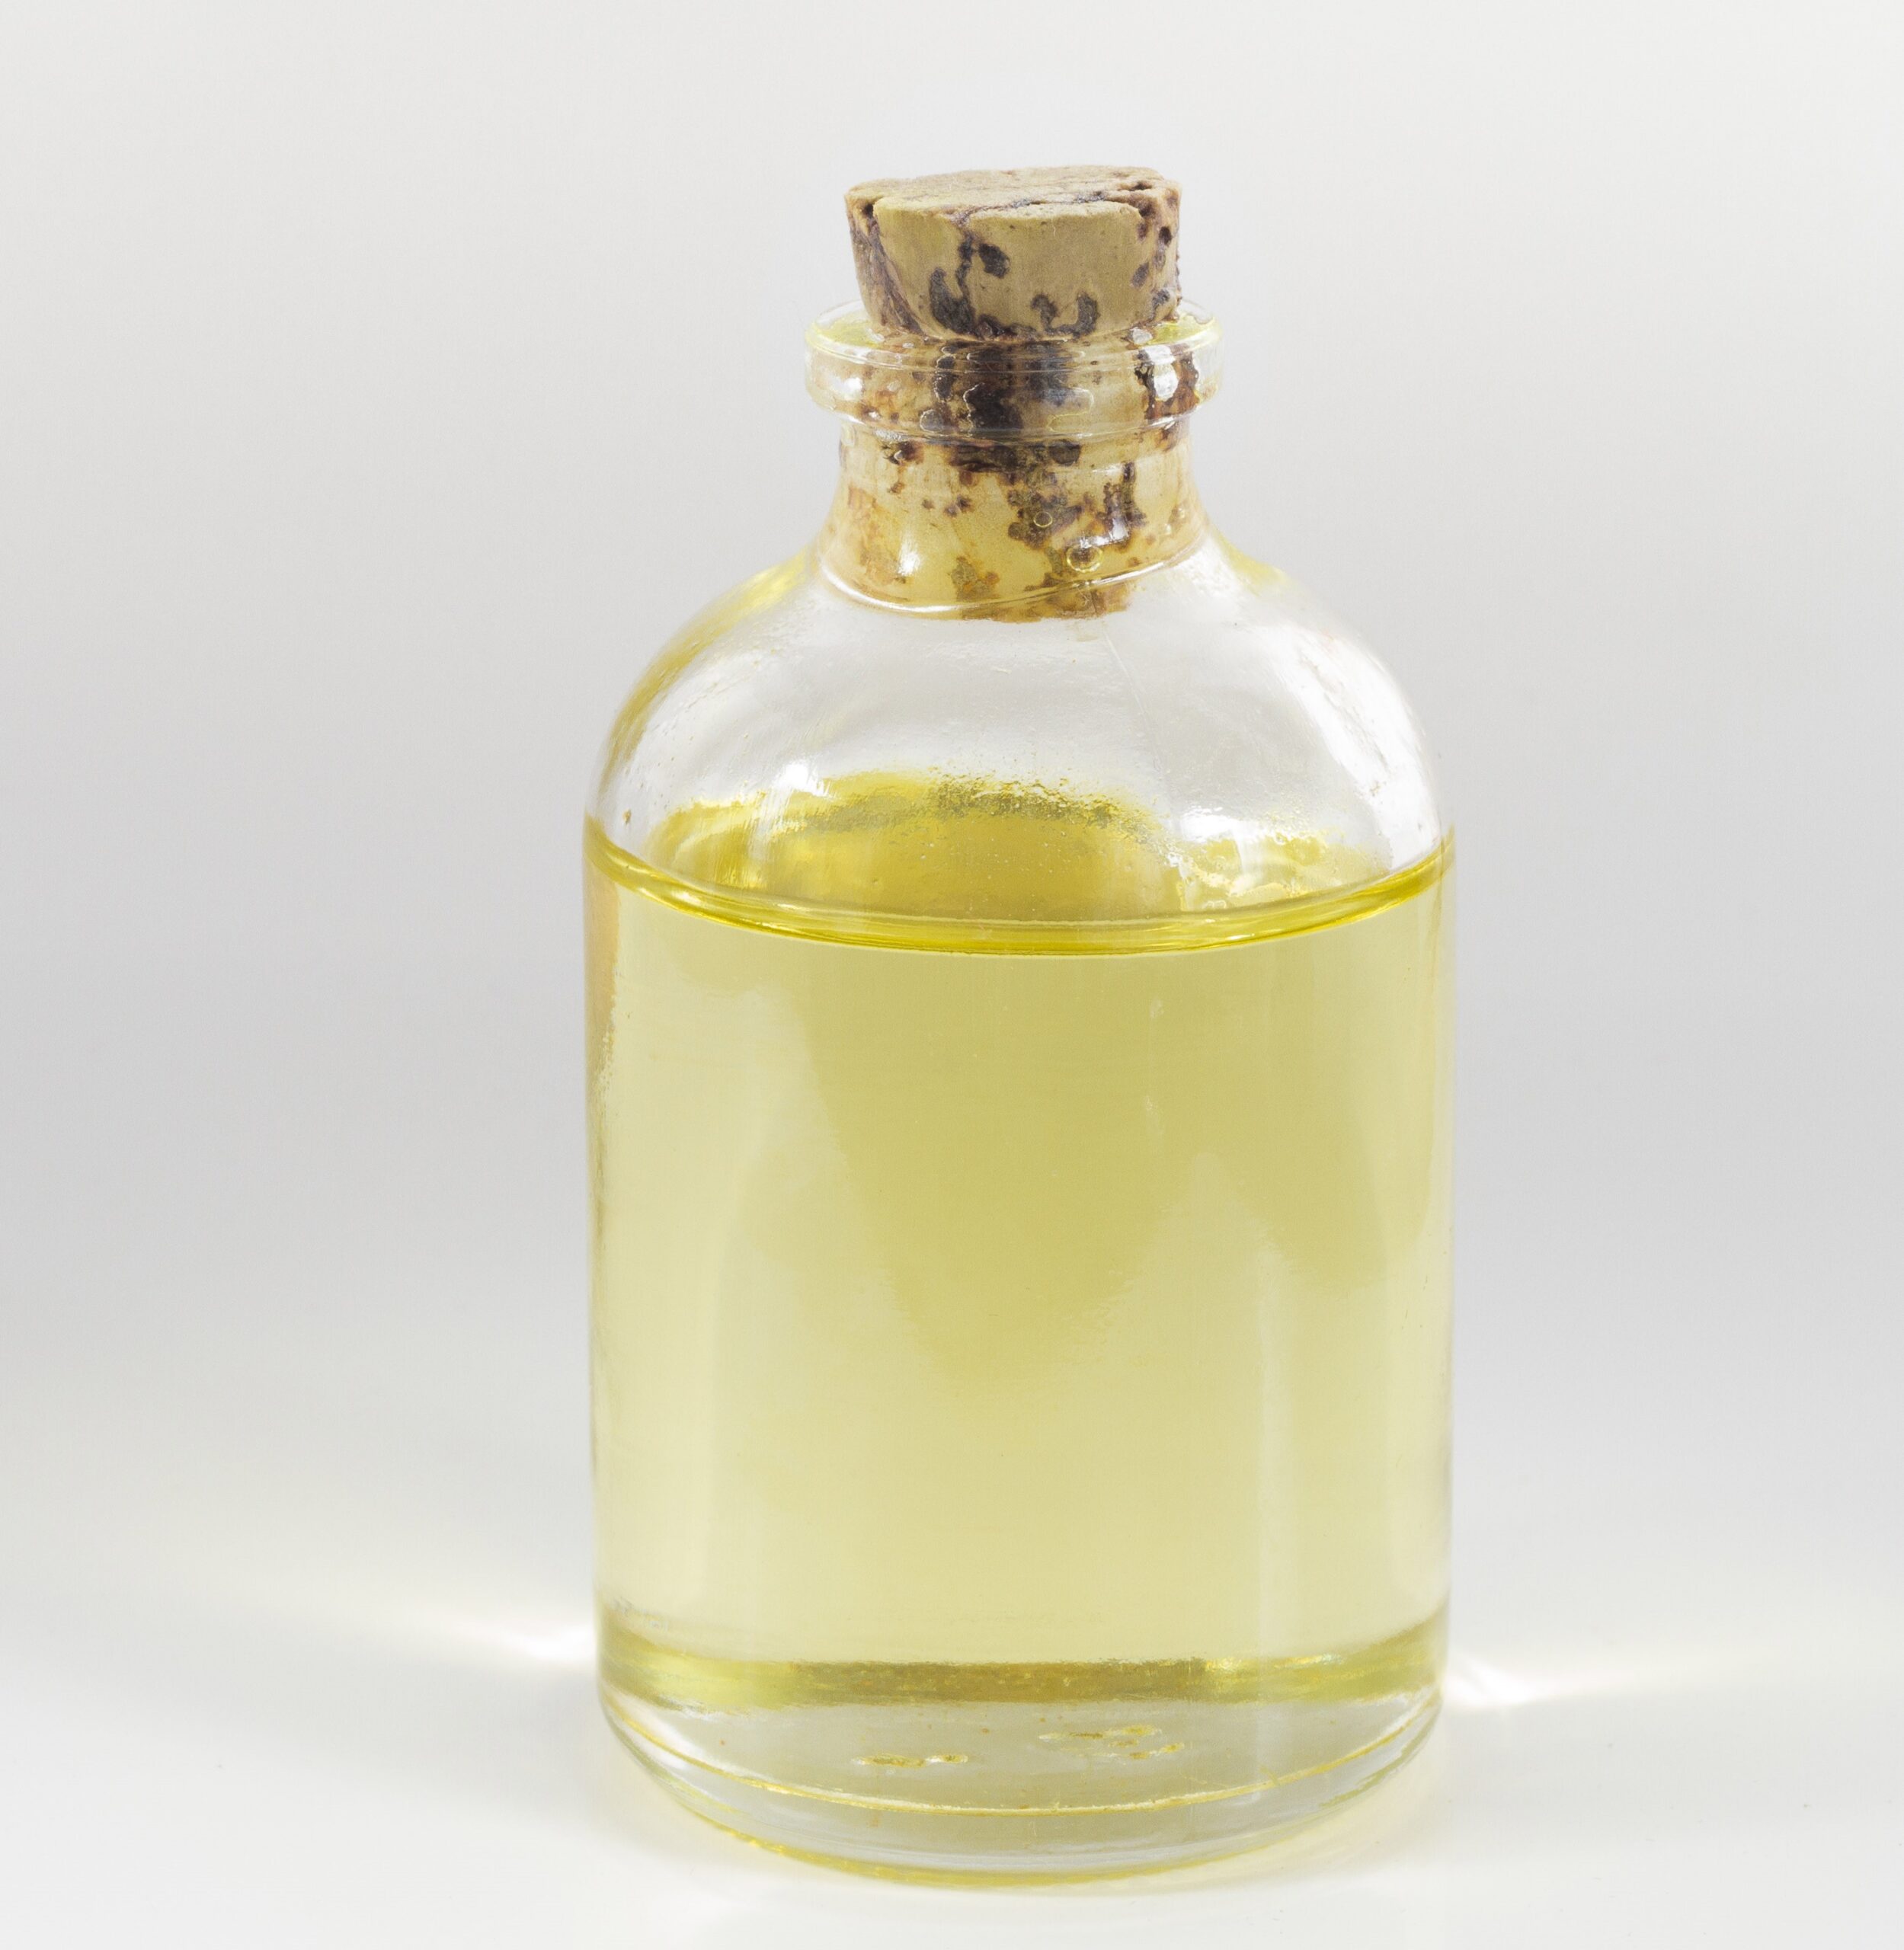 how-to-make-and-use-castor-oil-packs